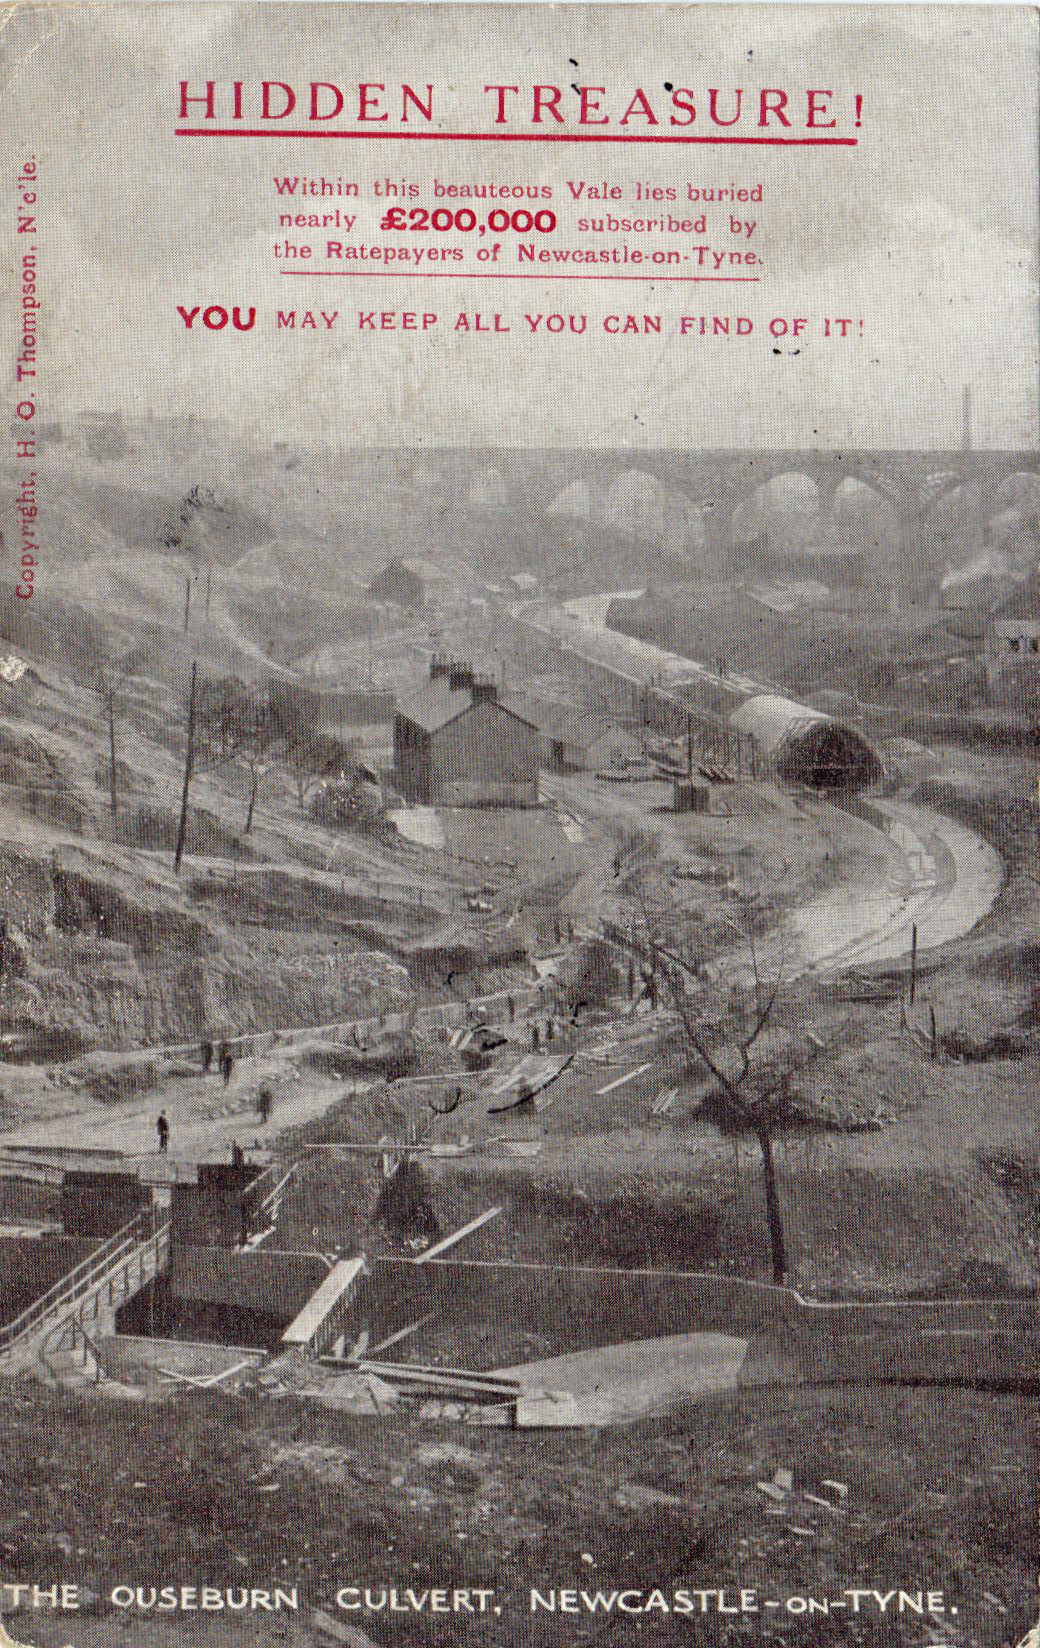 Ouseburn culvert being built, postcard with political message